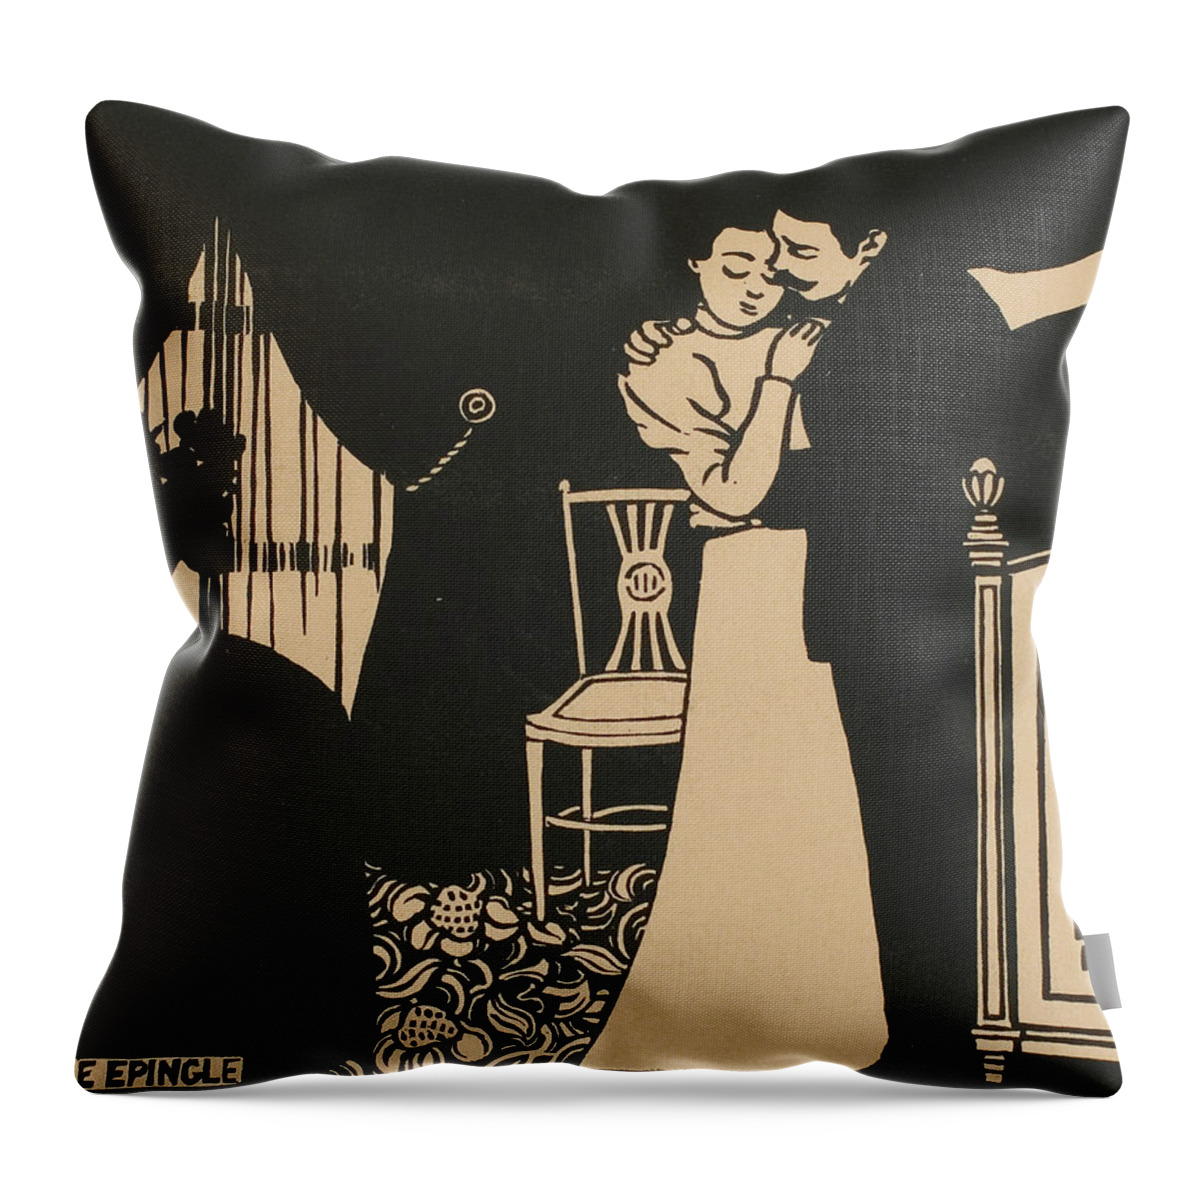 19th Century Art Throw Pillow featuring the relief The Fine Pin, plate three from Intimacies by Felix Edouard Vallotton